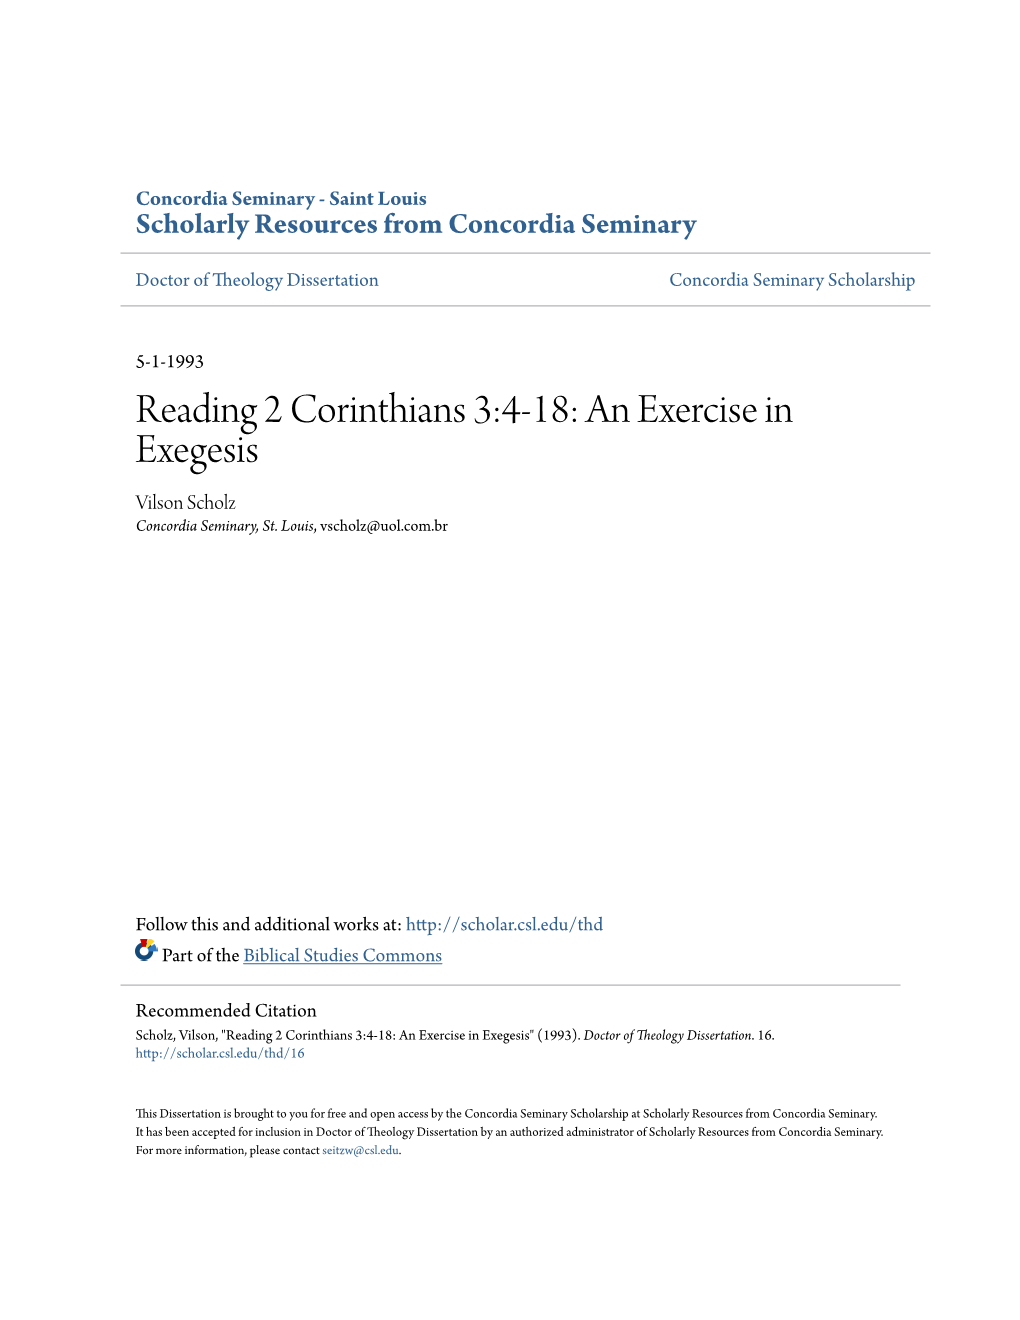 Reading 2 Corinthians 3:4-18: an Exercise in Exegesis Vilson Scholz Concordia Seminary, St